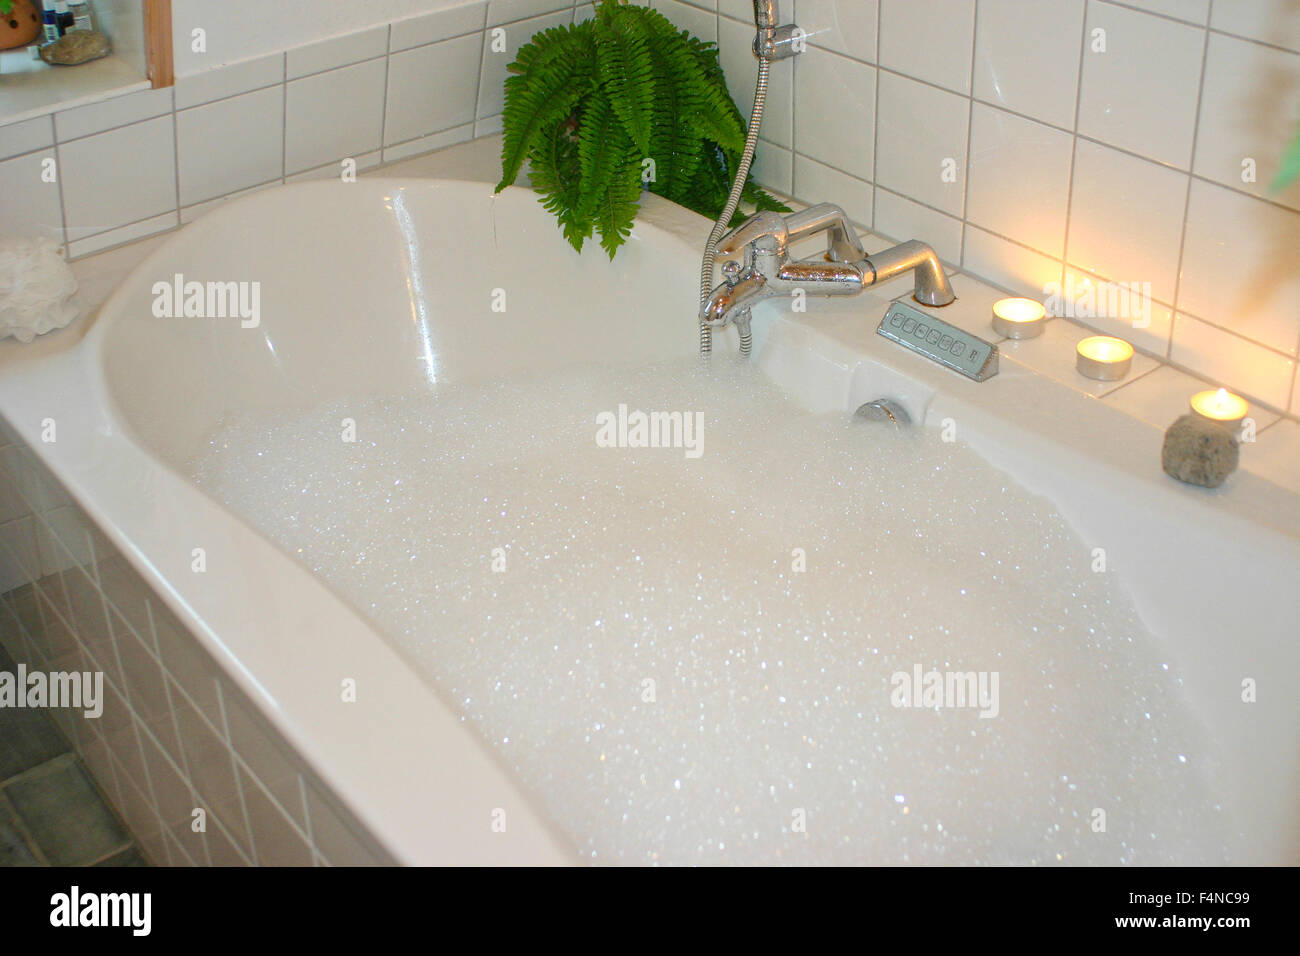 Bathtub with foamy water candles and a plant Stock Photo